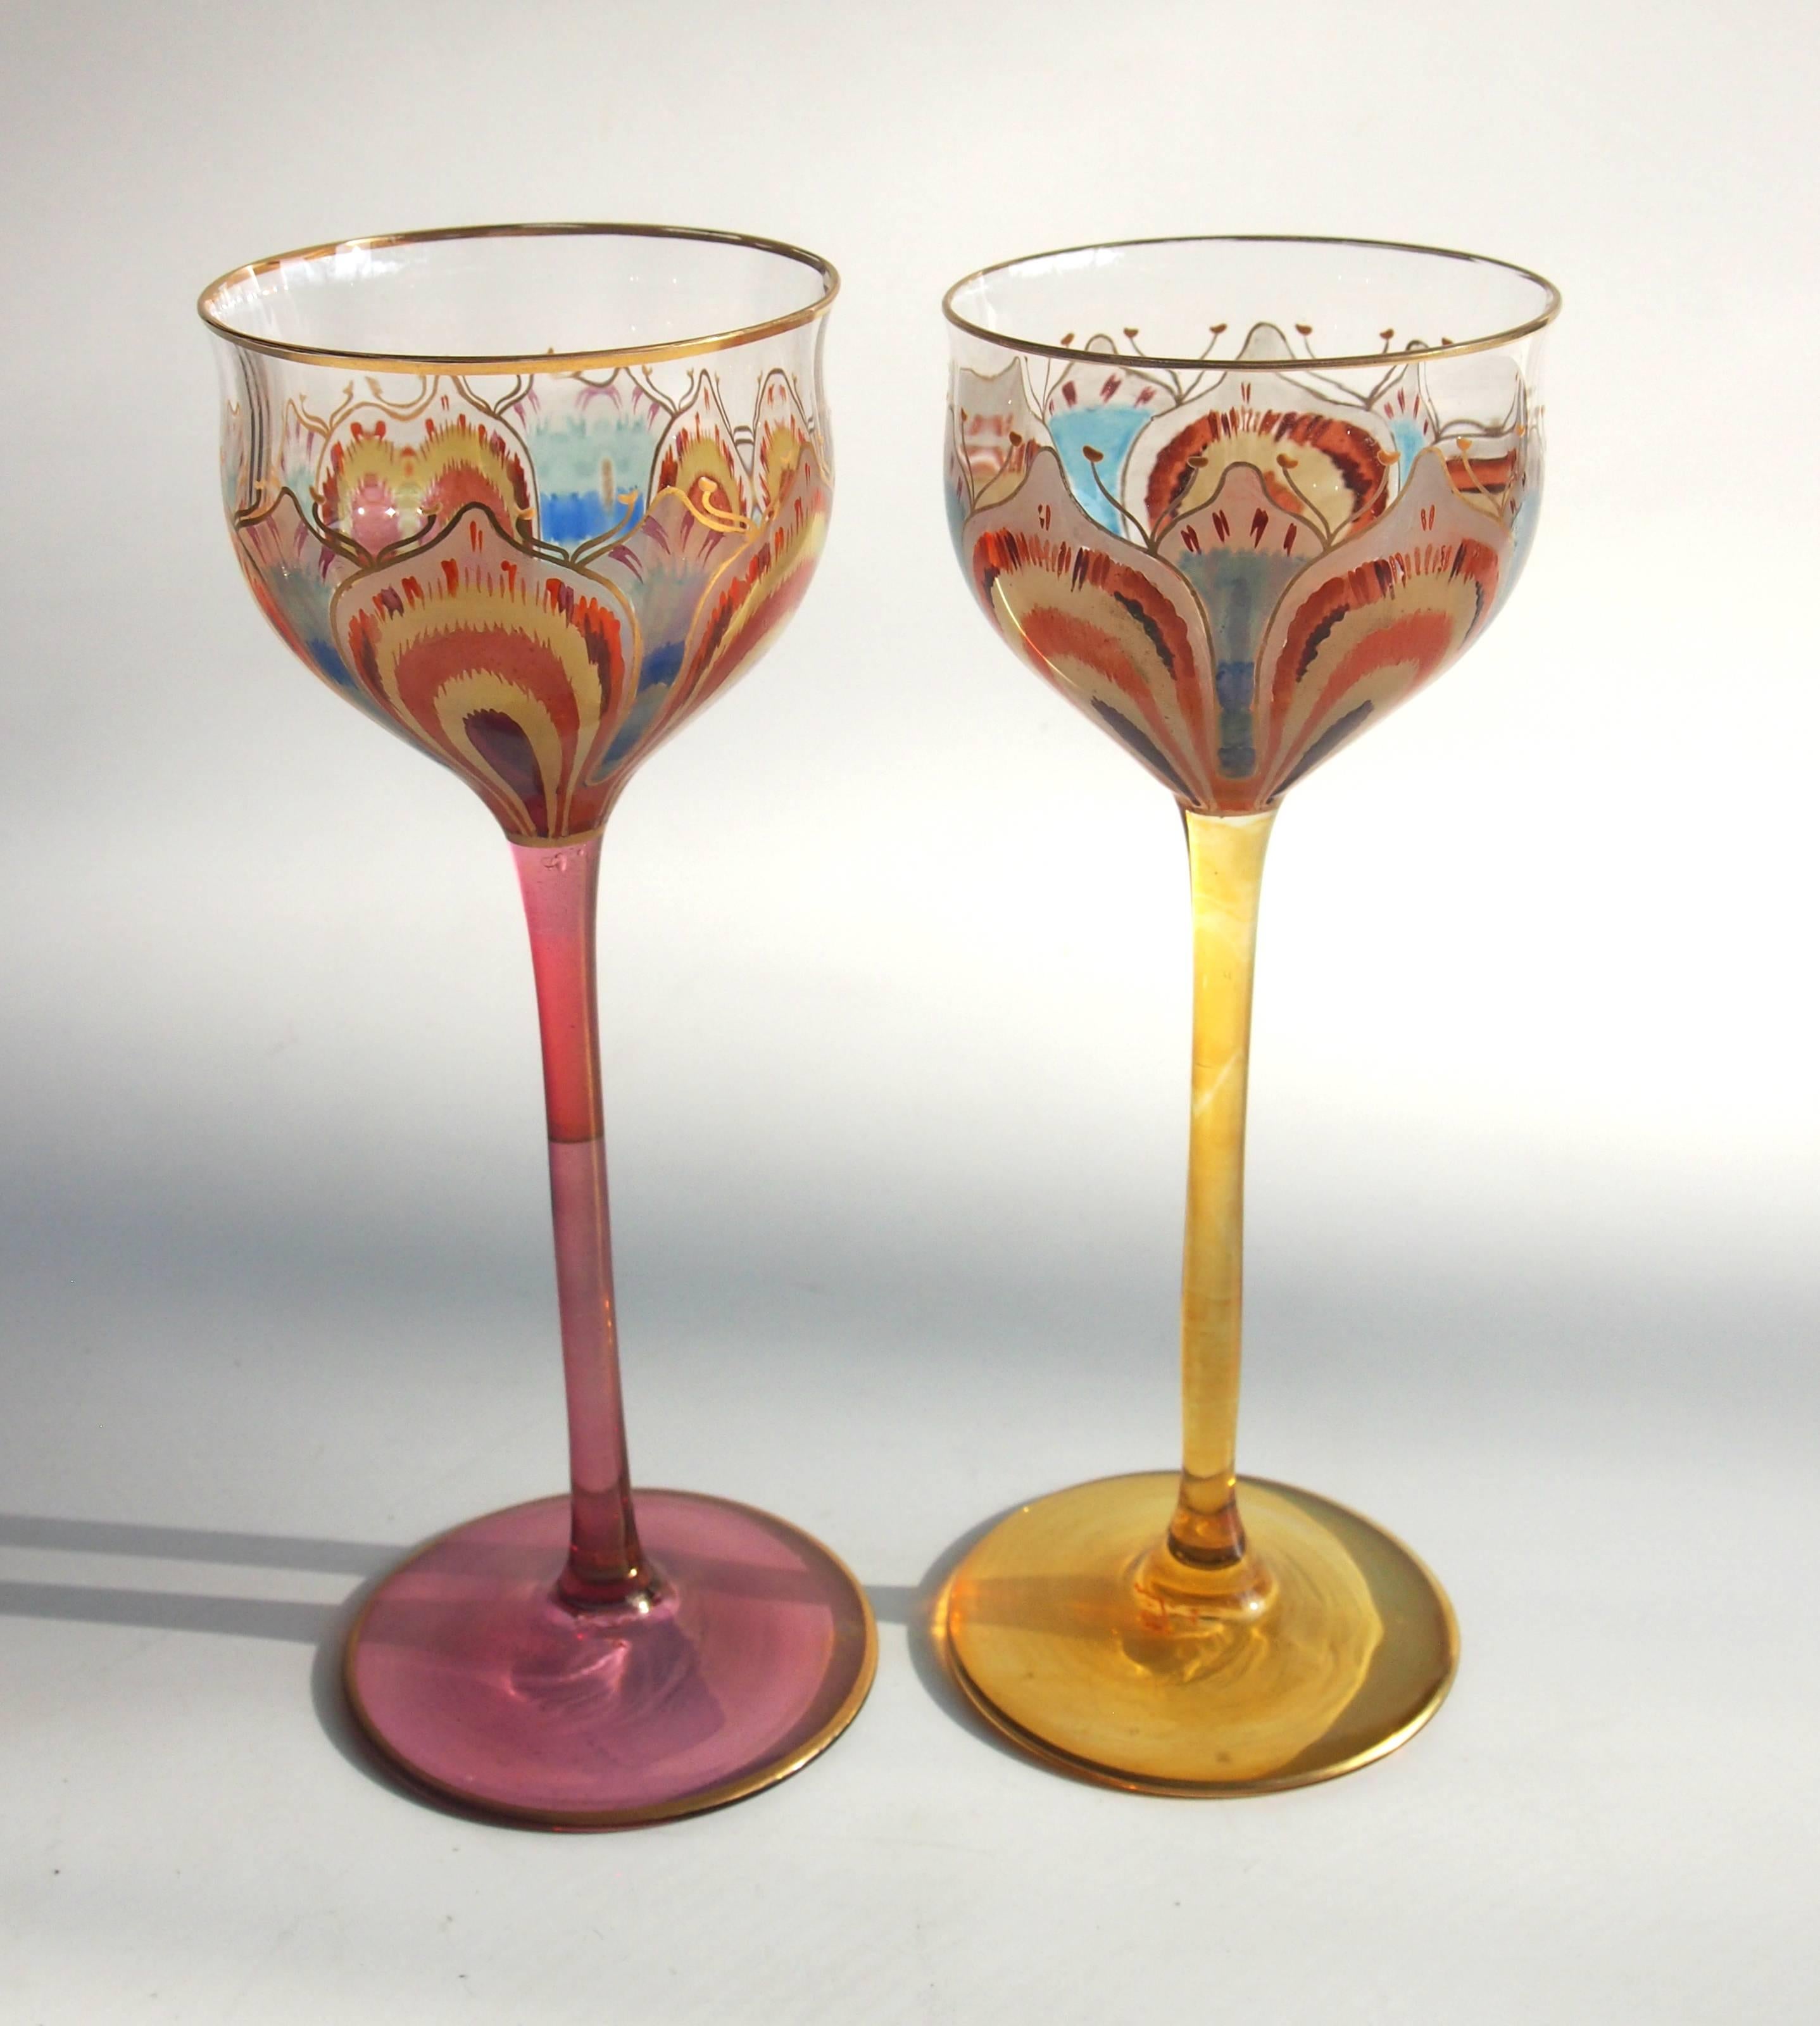 Superb pair of Art Nouveau gilded and enameled, almost psychedelic, Meyr's Neffe 'Flower' glasses. One with a yellow stem and one with a pink stem. They are enameled with an open flower around the bowl so only when you drink from them do you get the